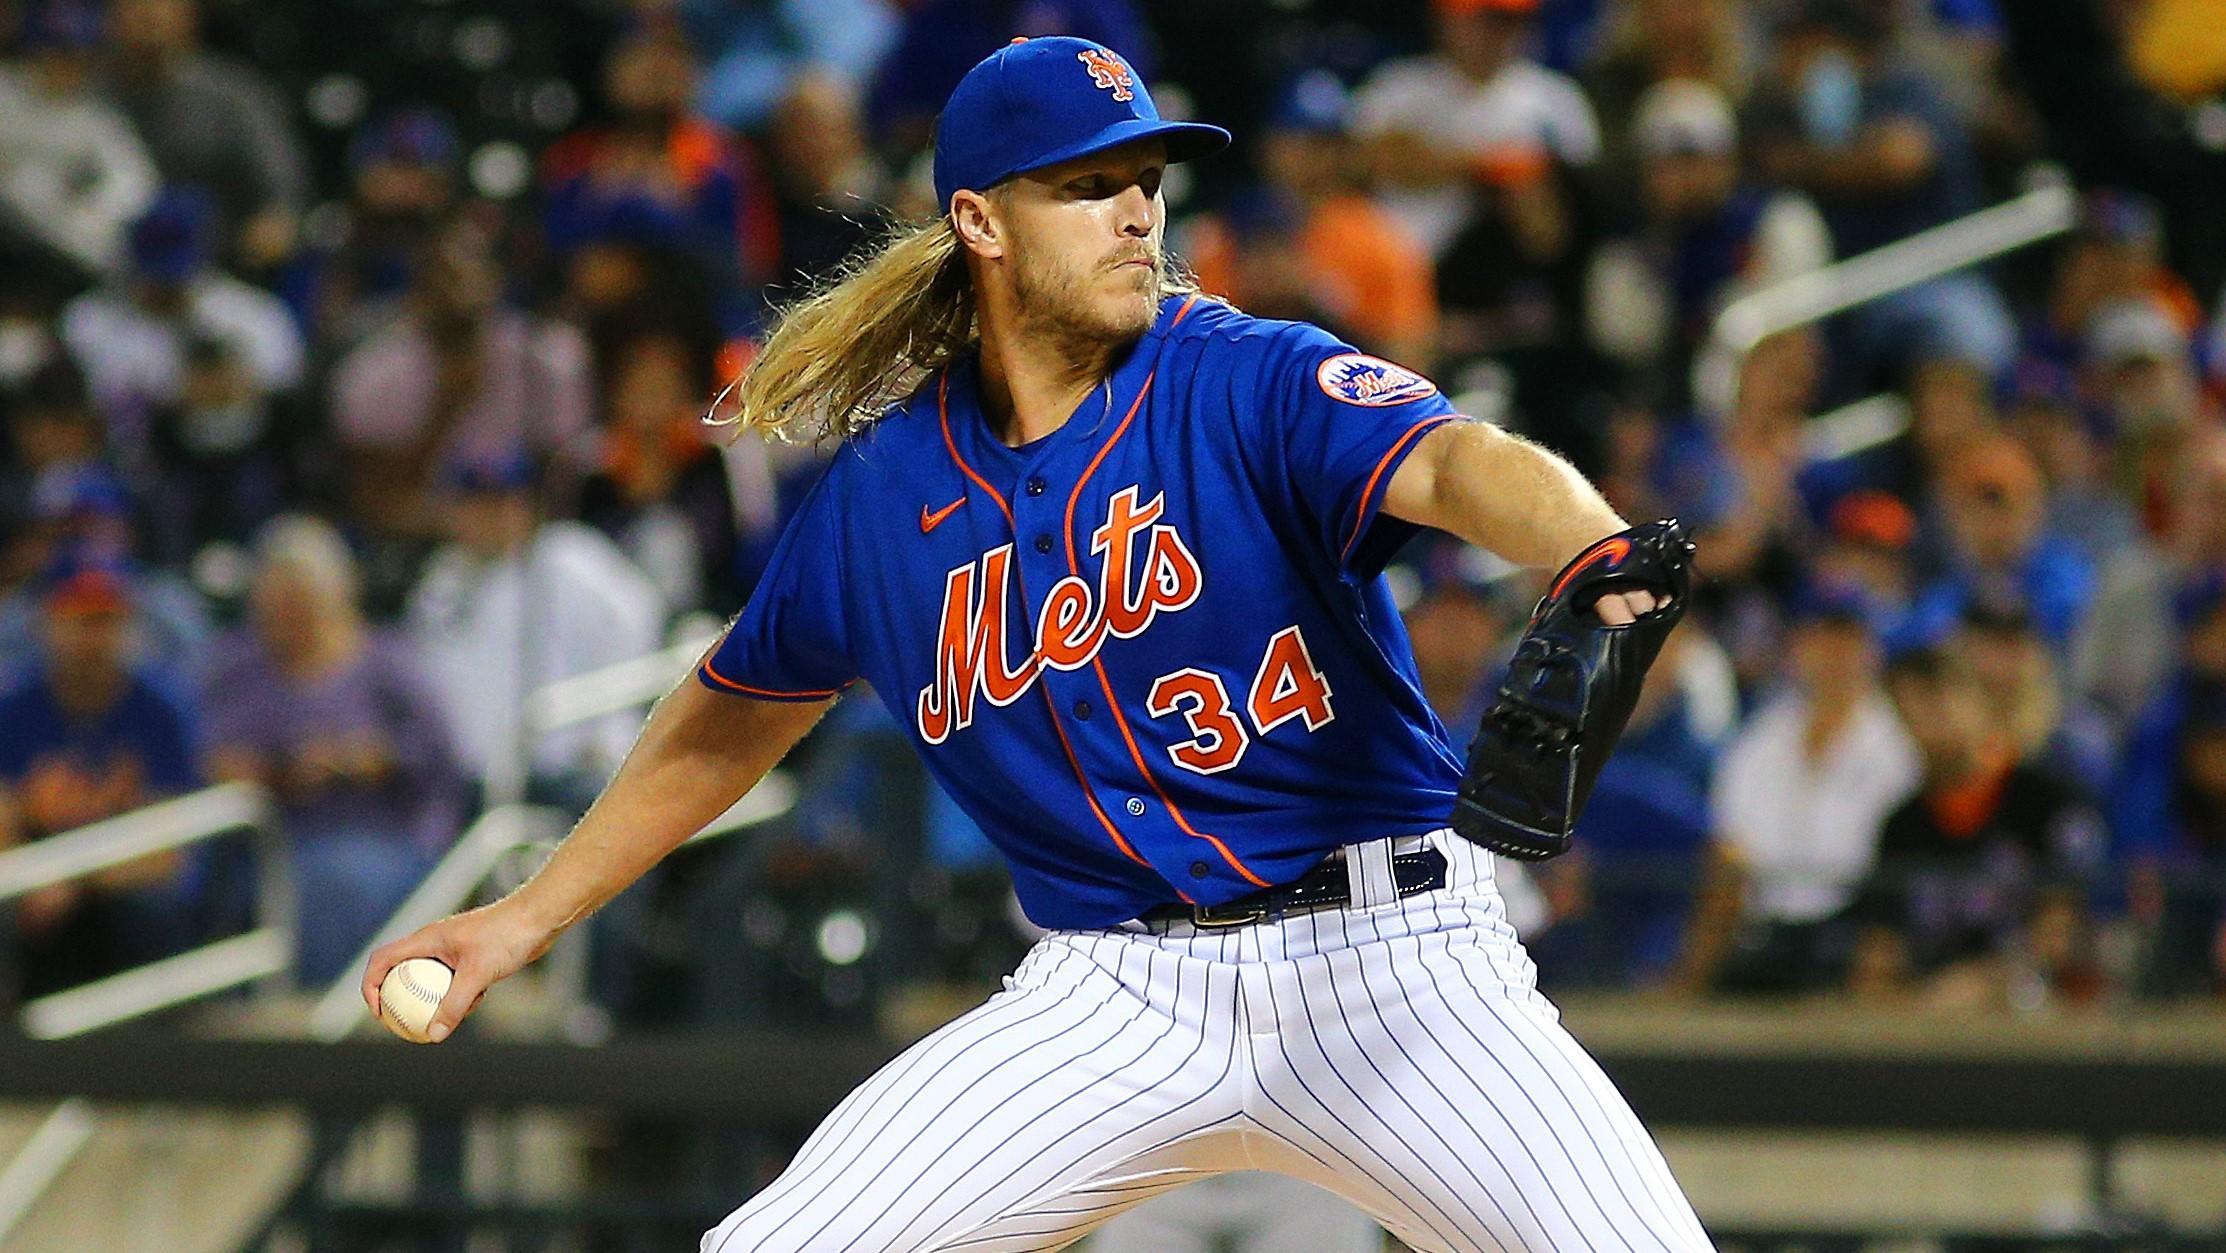 New York Mets starting pitcher Noah Syndergaard (34) throws against the Miami Marlins during the first inning of game two of a doubleheader at Citi Field. / Andy Marlin-USA TODAY Sports